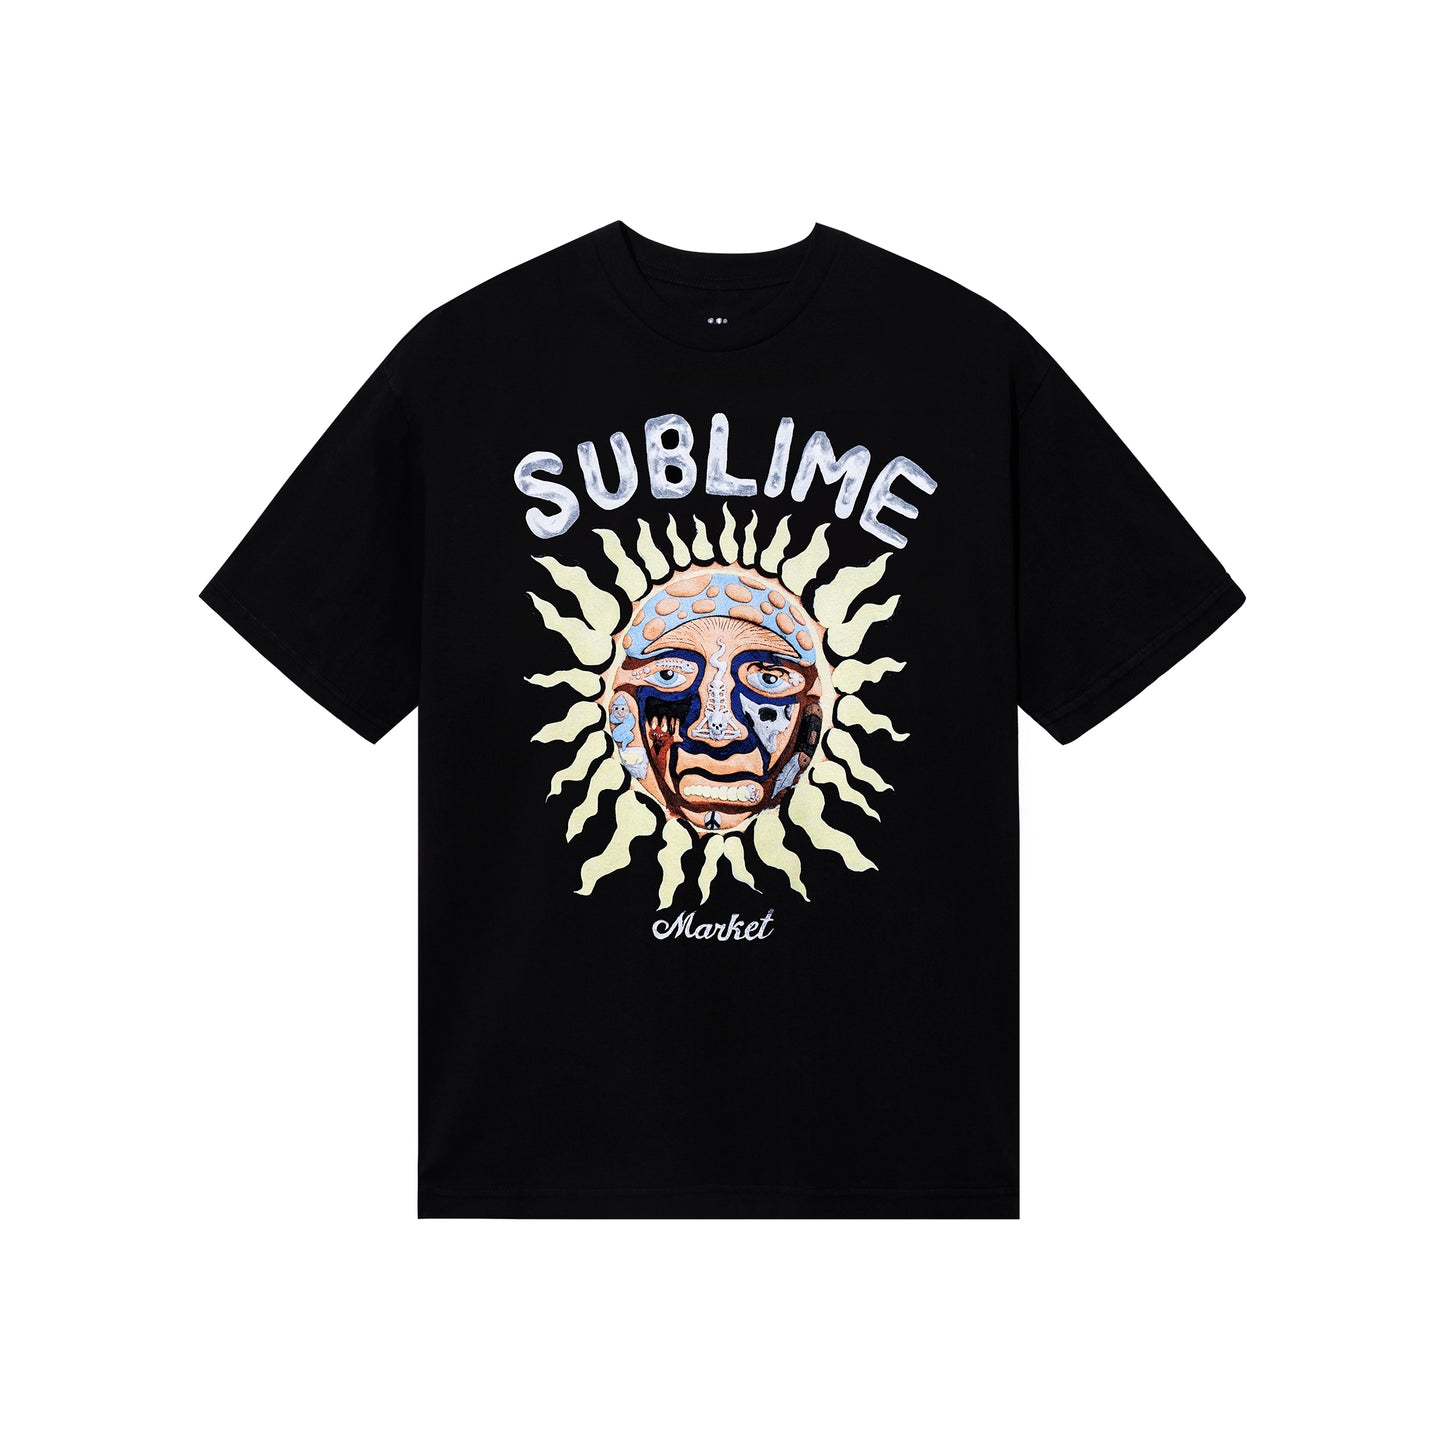 MARKET clothing brand MKT SUBLIME FREEDOM SUN T-SHIRT. Find more graphic tees, hats, hoodies and more at MarketStudios.com. Formally Chinatown Market.